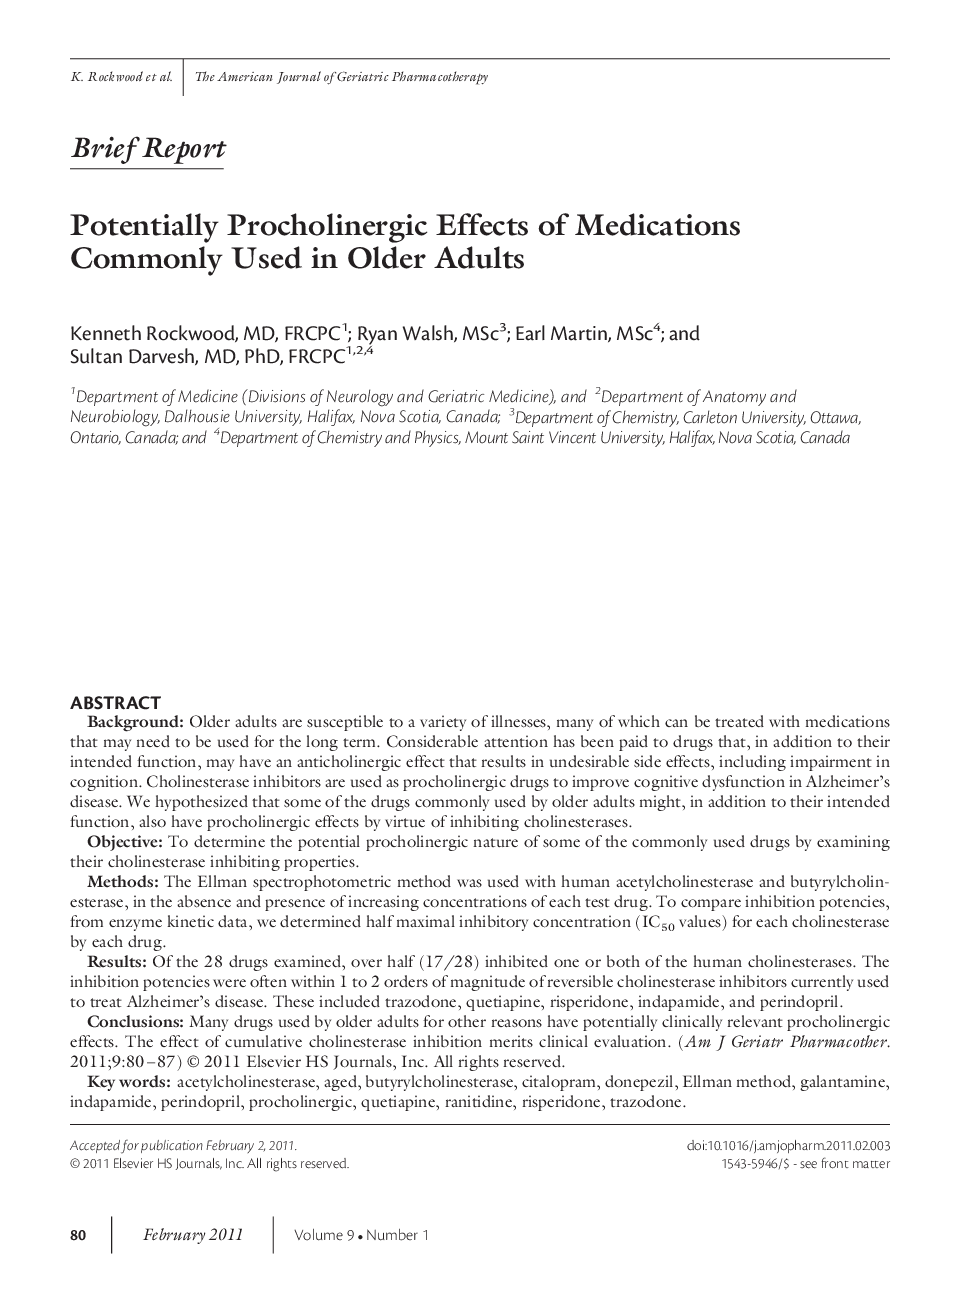 Potentially Procholinergic Effects of Medications Commonly Used in Older Adults